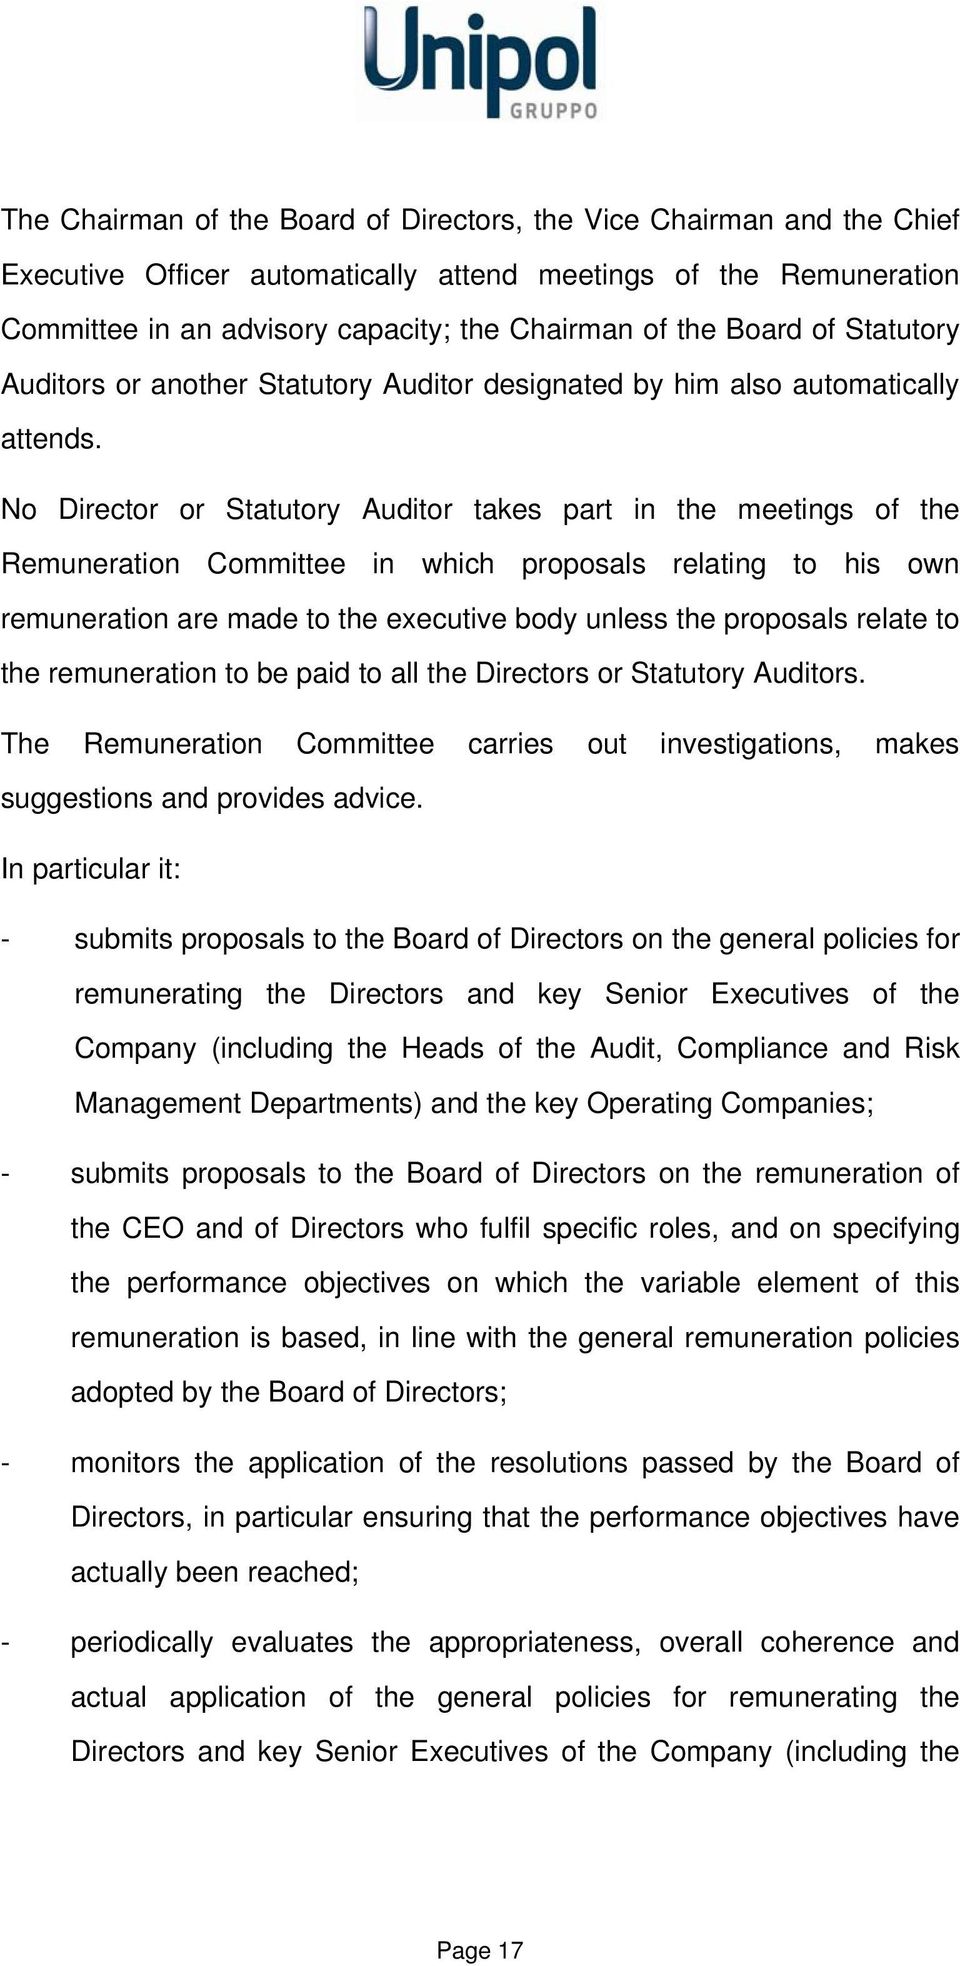 No Director or Statutory Auditor takes part in the meetings of the Remuneration Committee in which proposals relating to his own remuneration are made to the executive body unless the proposals